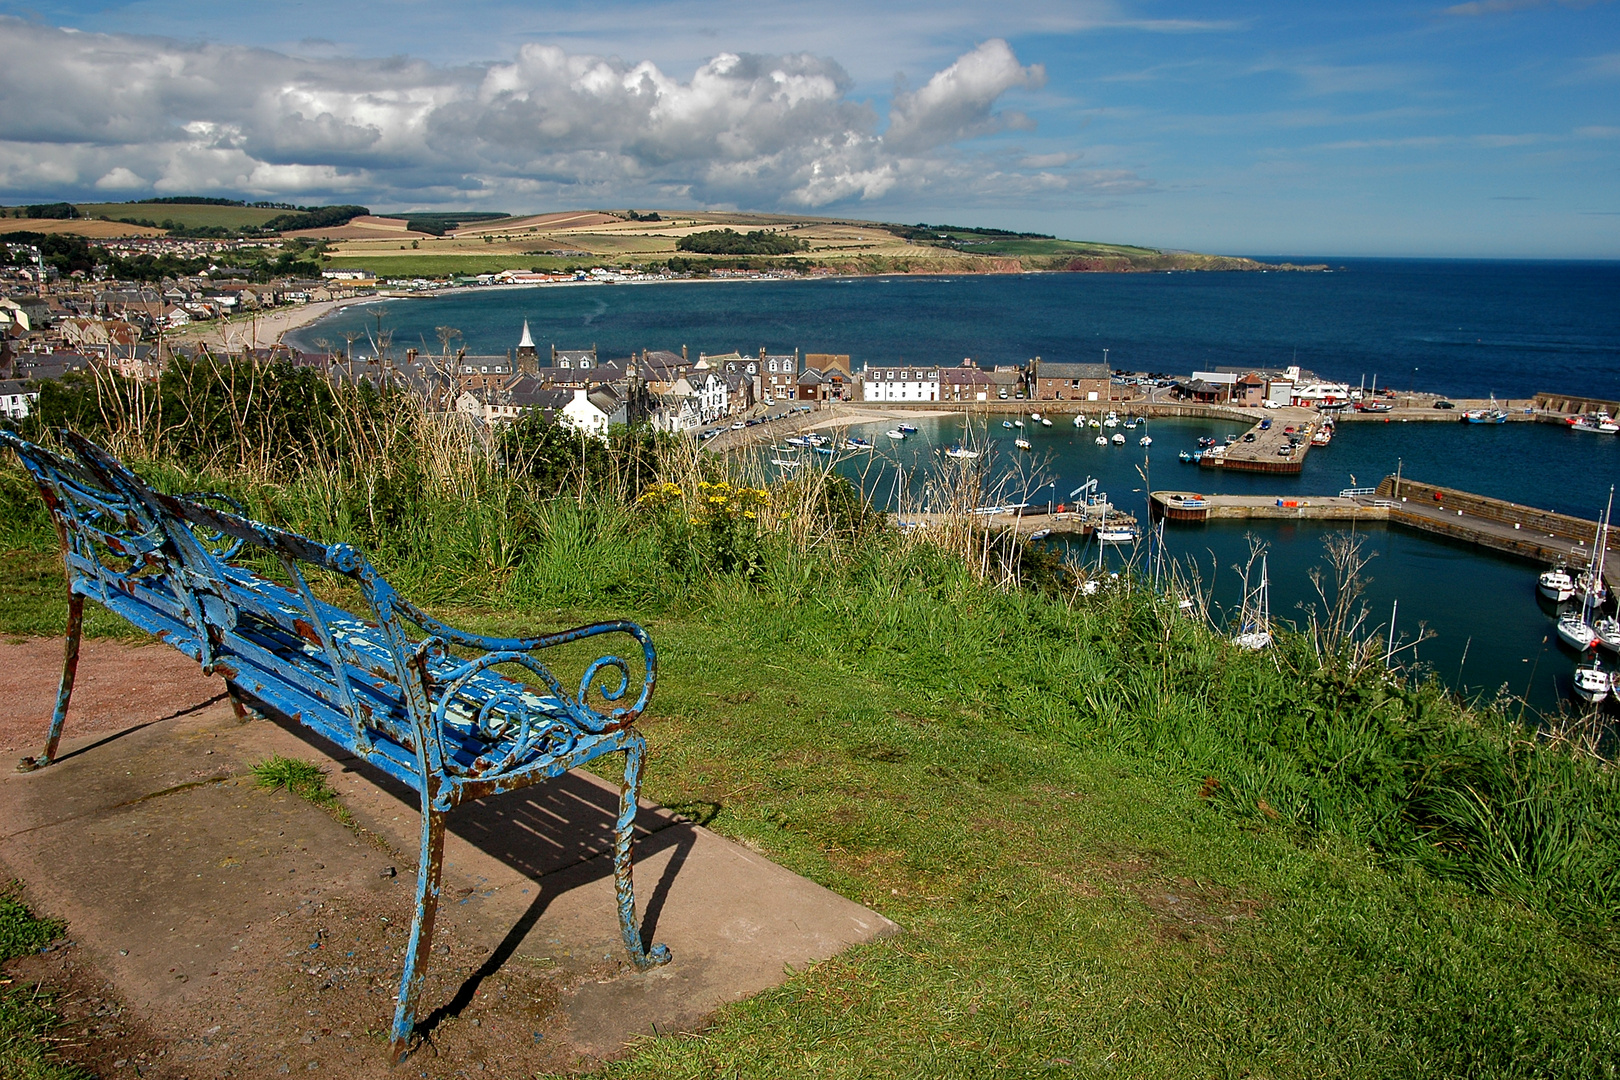 Take a seat and have a look on Stonehaven